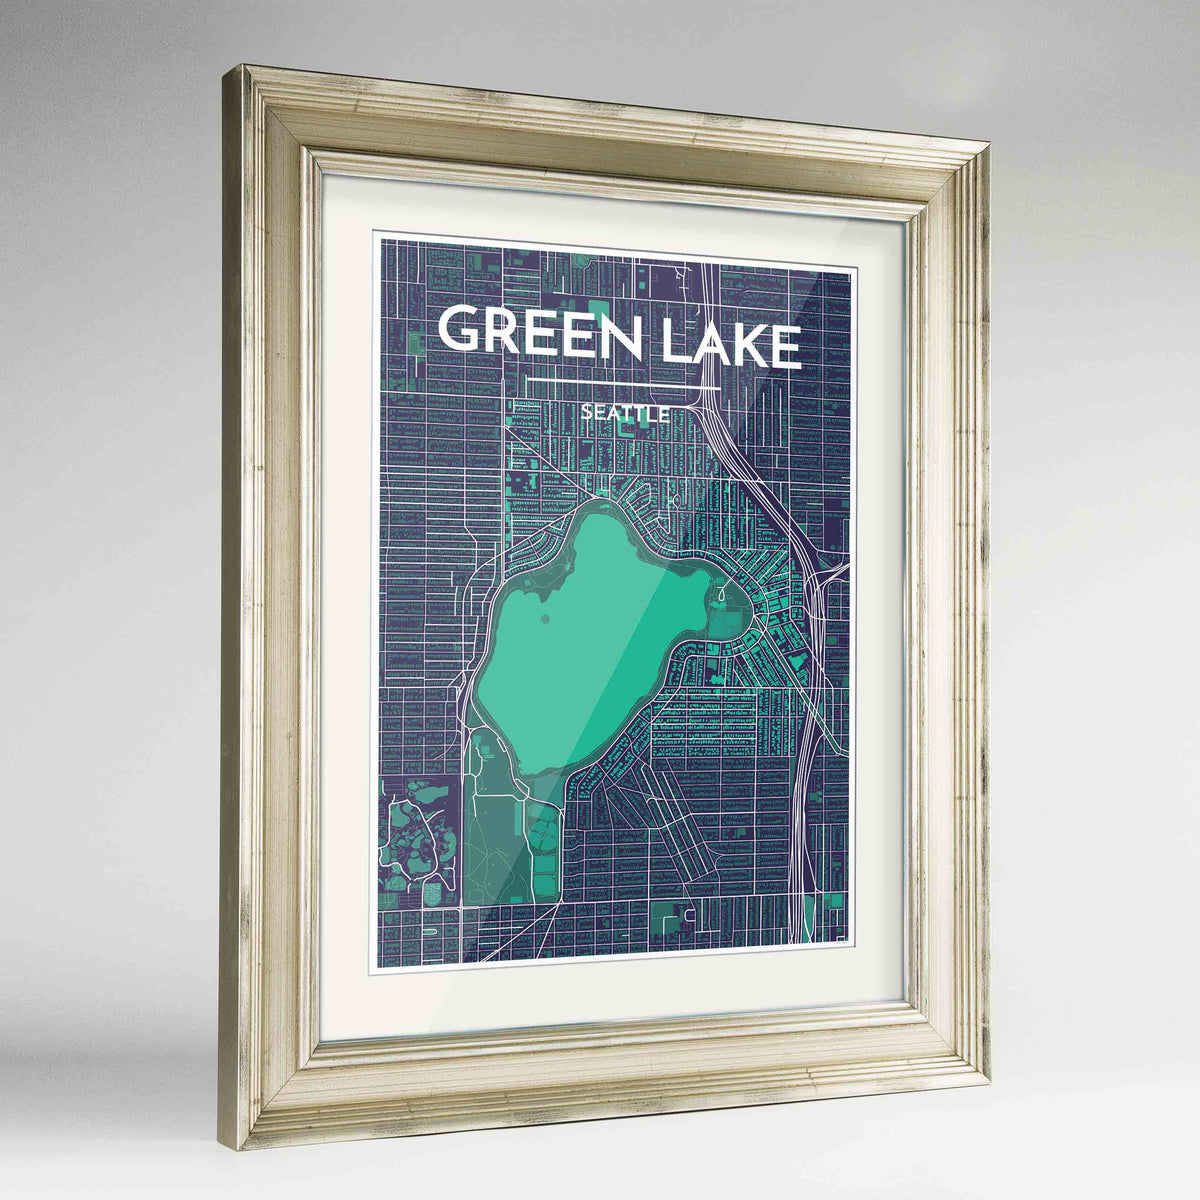 Framed Seattle First Hill Neighbourhood Map Art Print 24x36&quot; Champagne frame Point Two Design Group